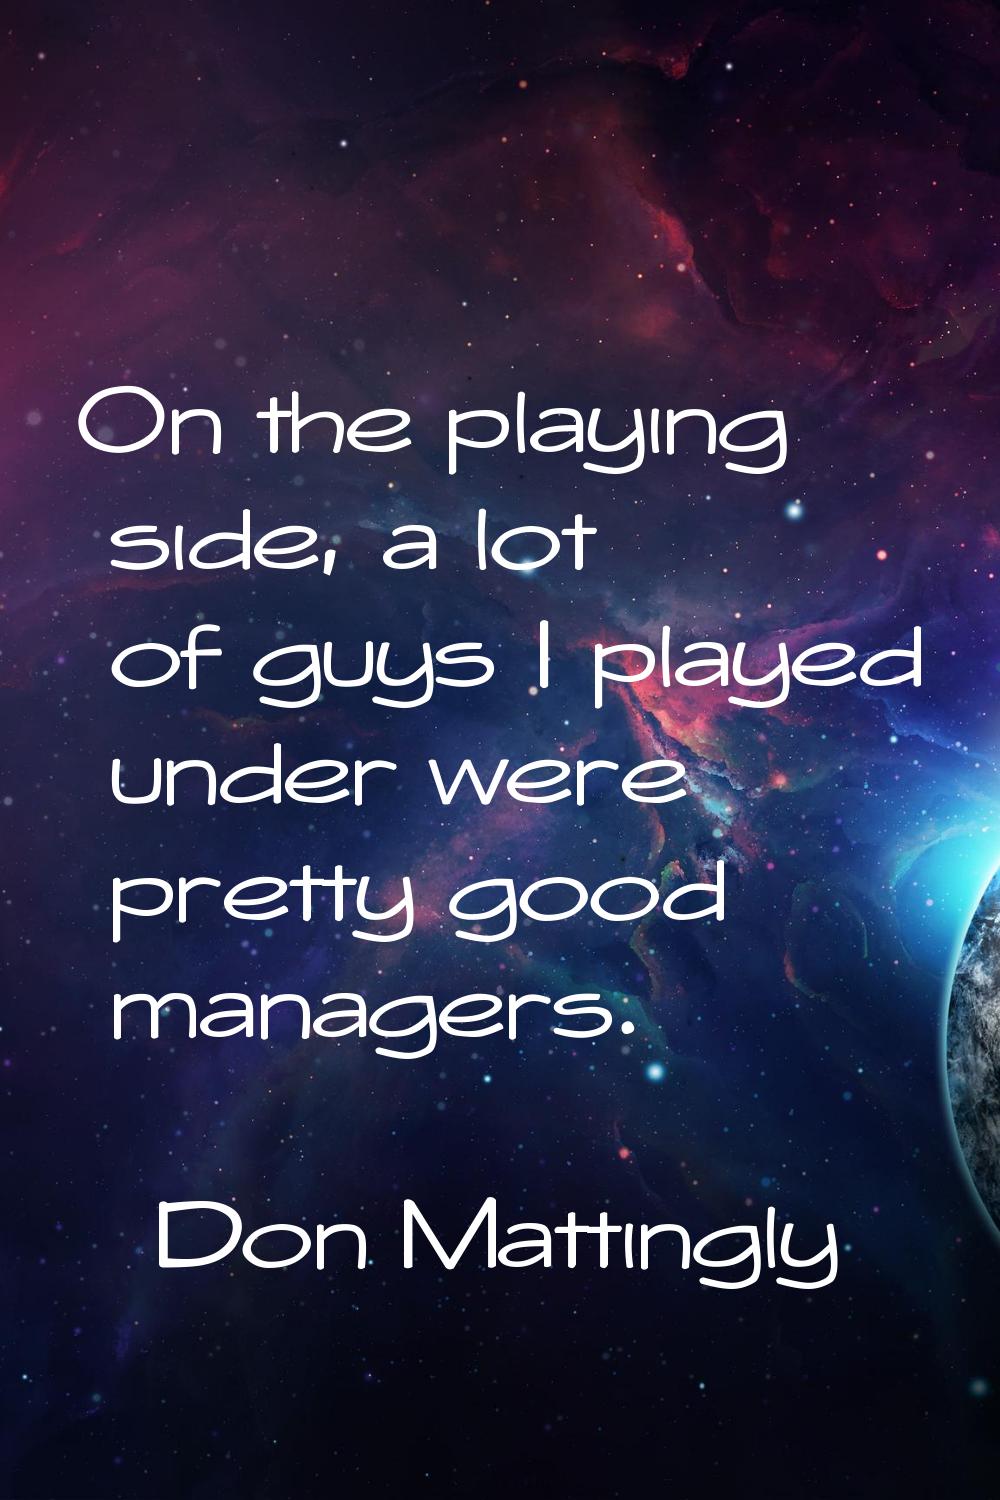 On the playing side, a lot of guys I played under were pretty good managers.